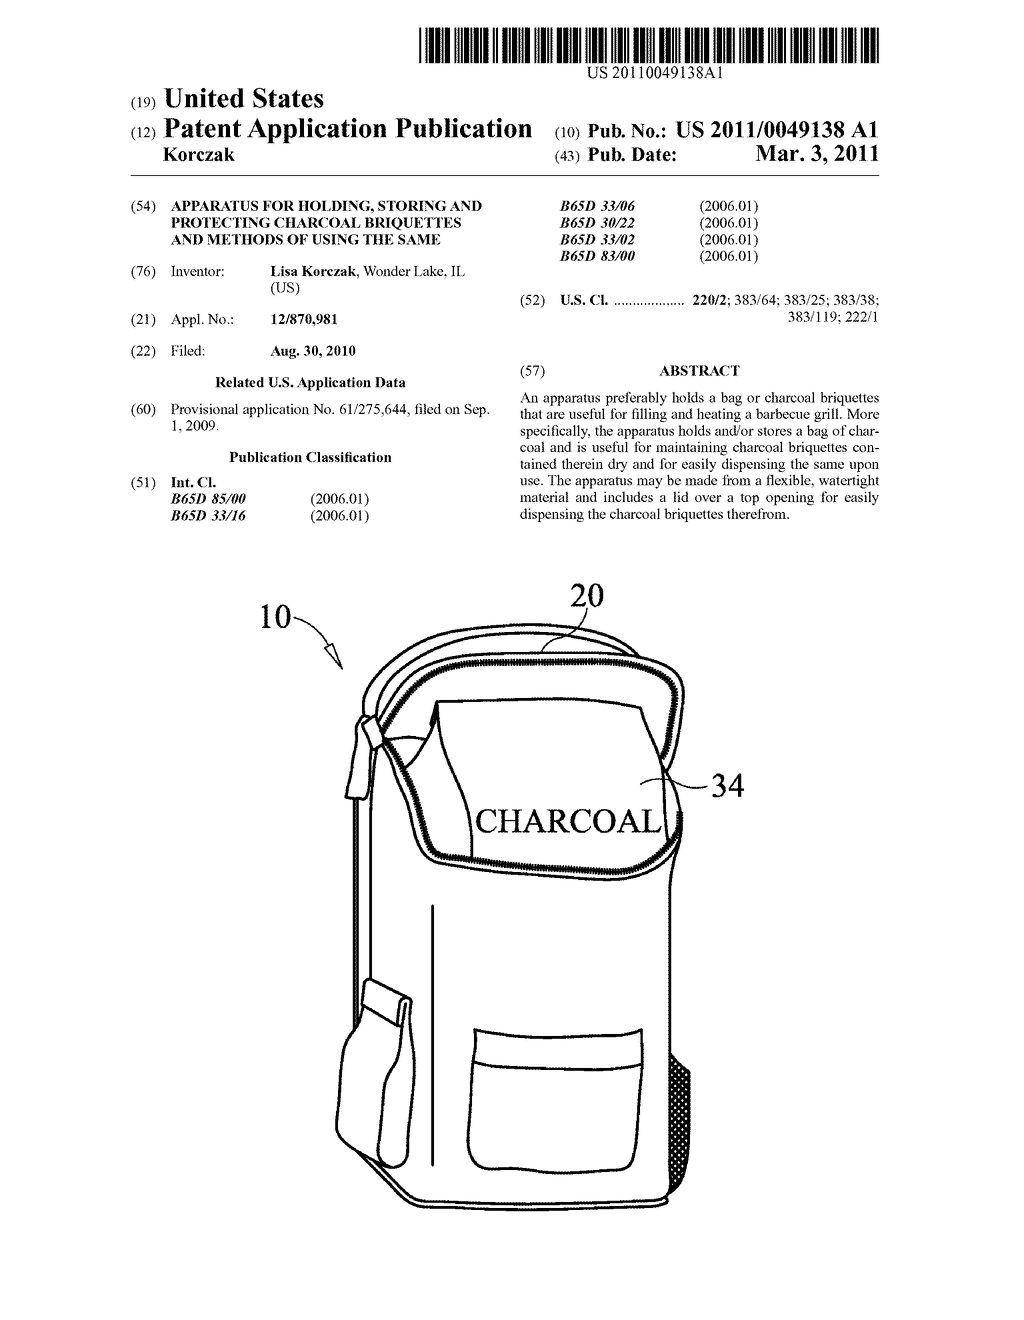 Apparatus for Holding, Storing and Protecting Charcoal Briquettes and Methods of Using the Same - diagram, schematic, and image 01